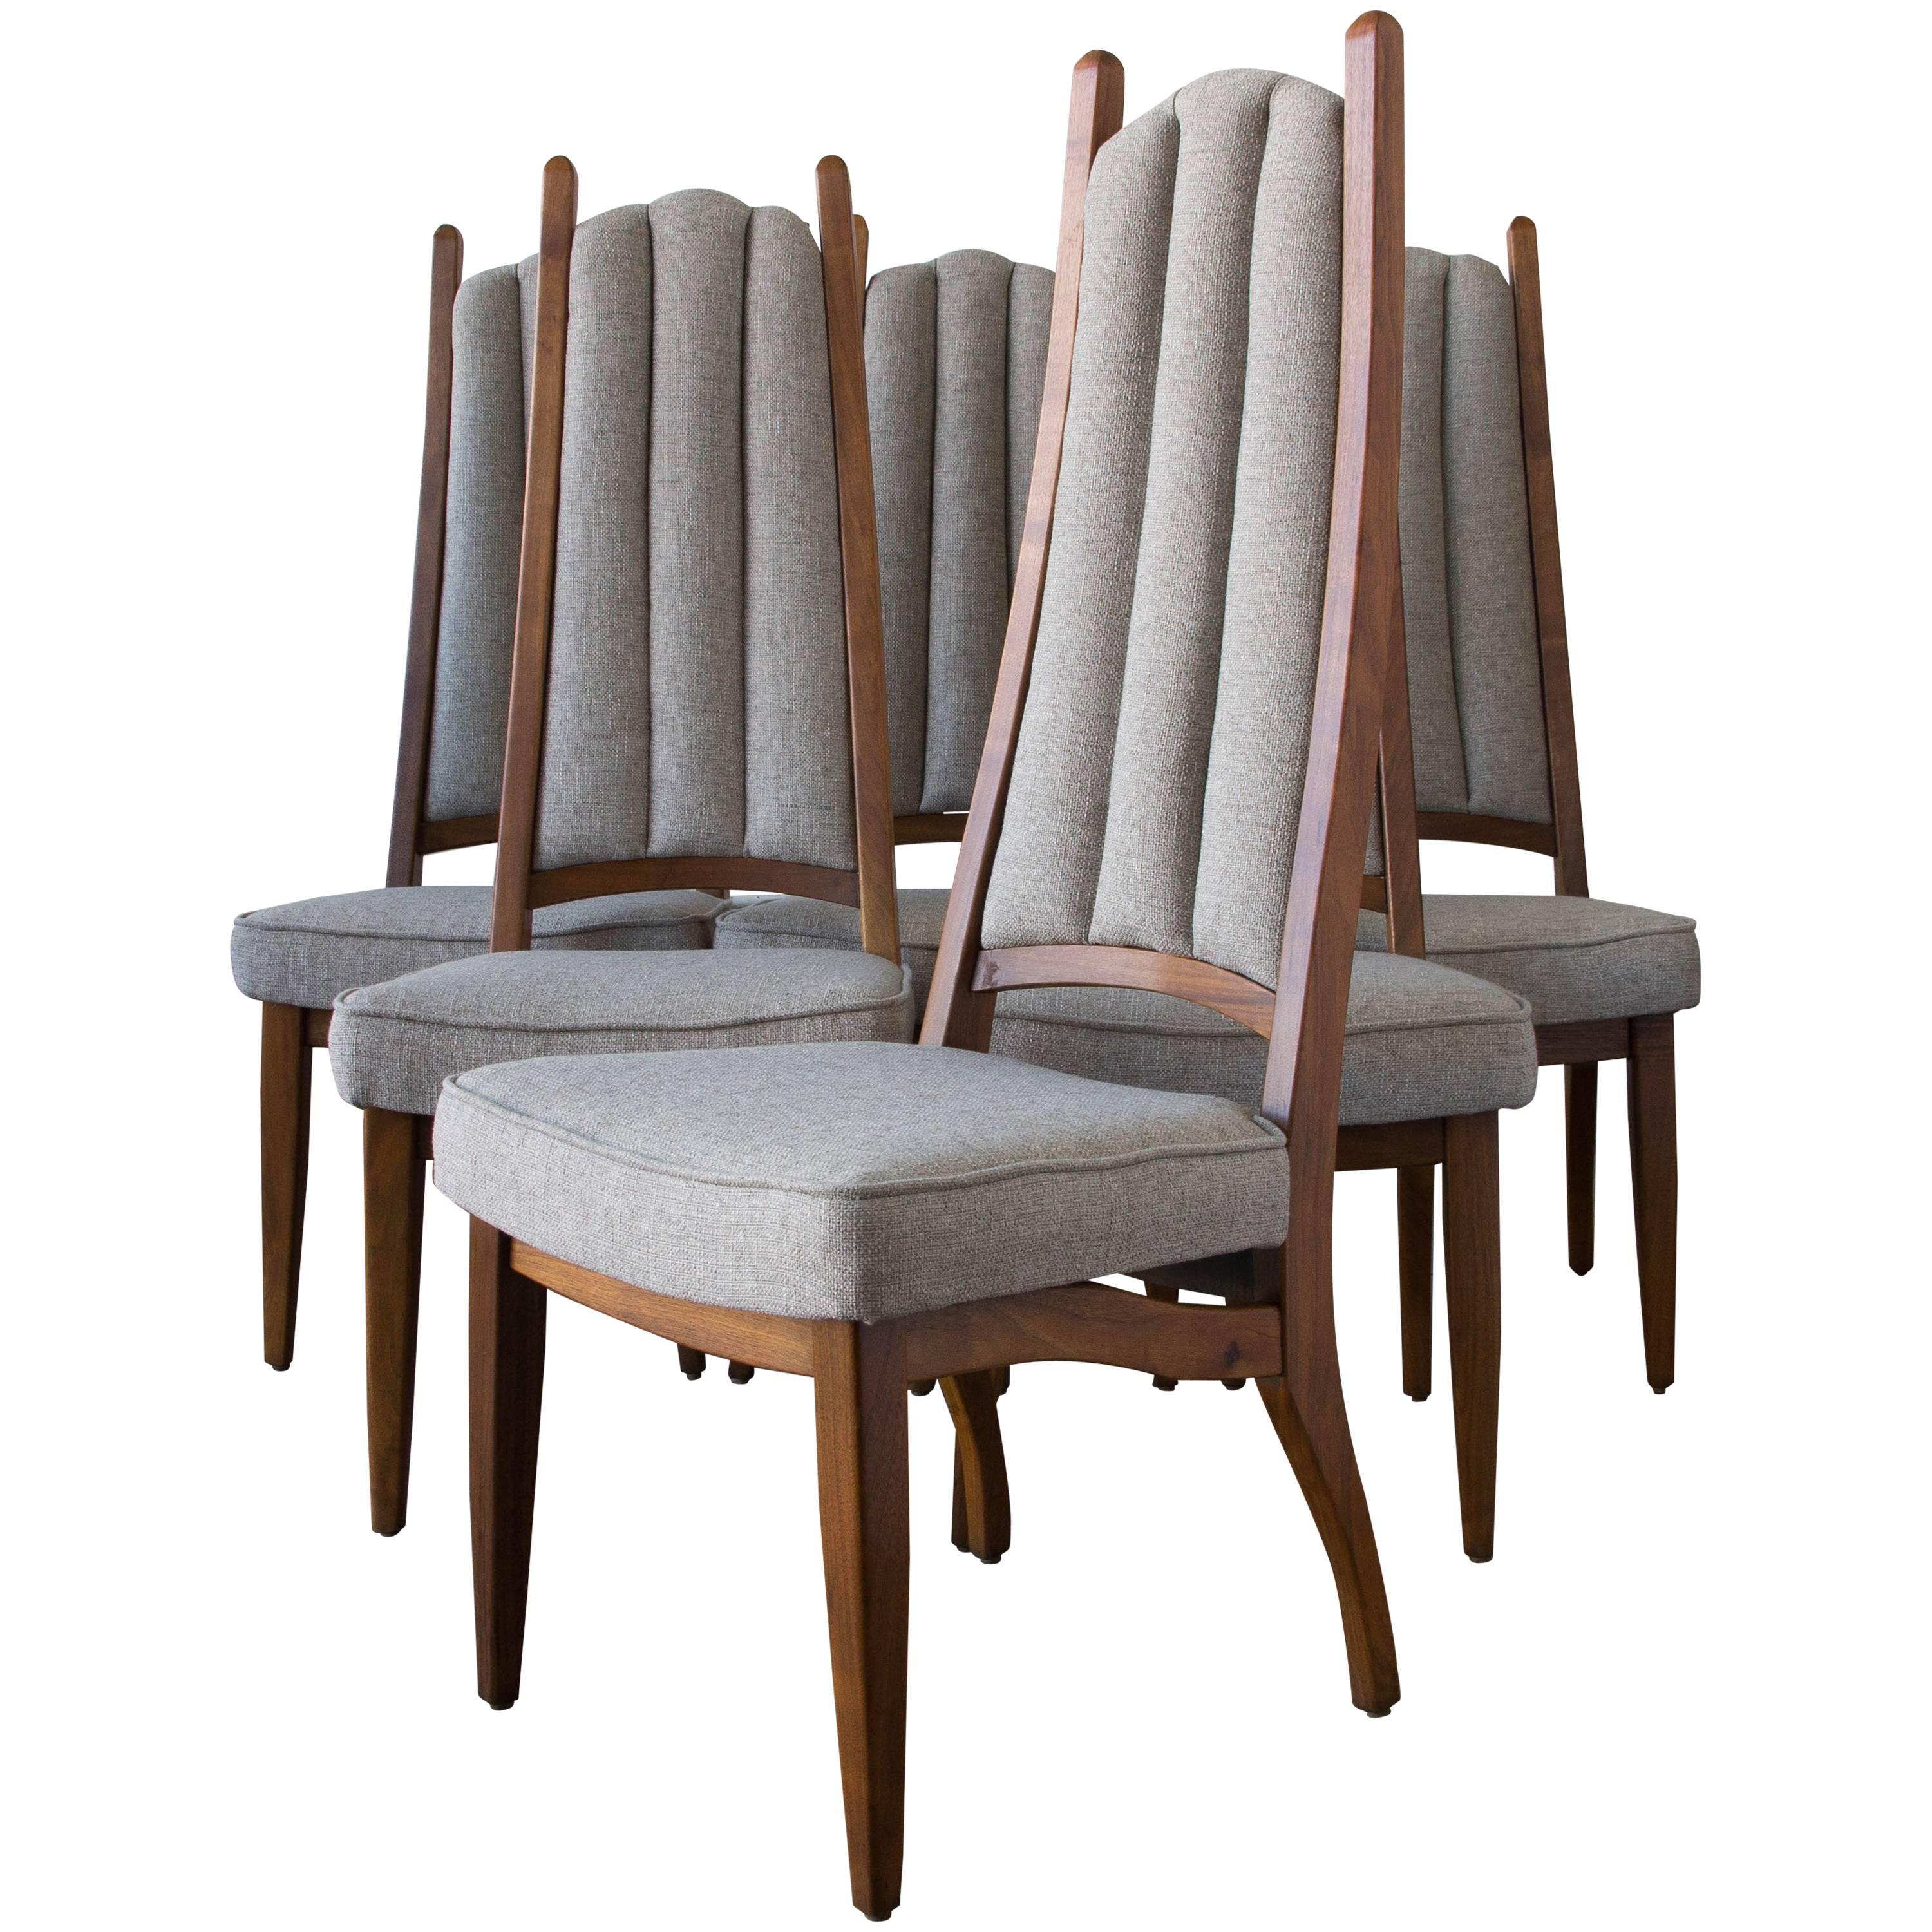 Set of Six Cal-Mode High Backed Dining Chairs